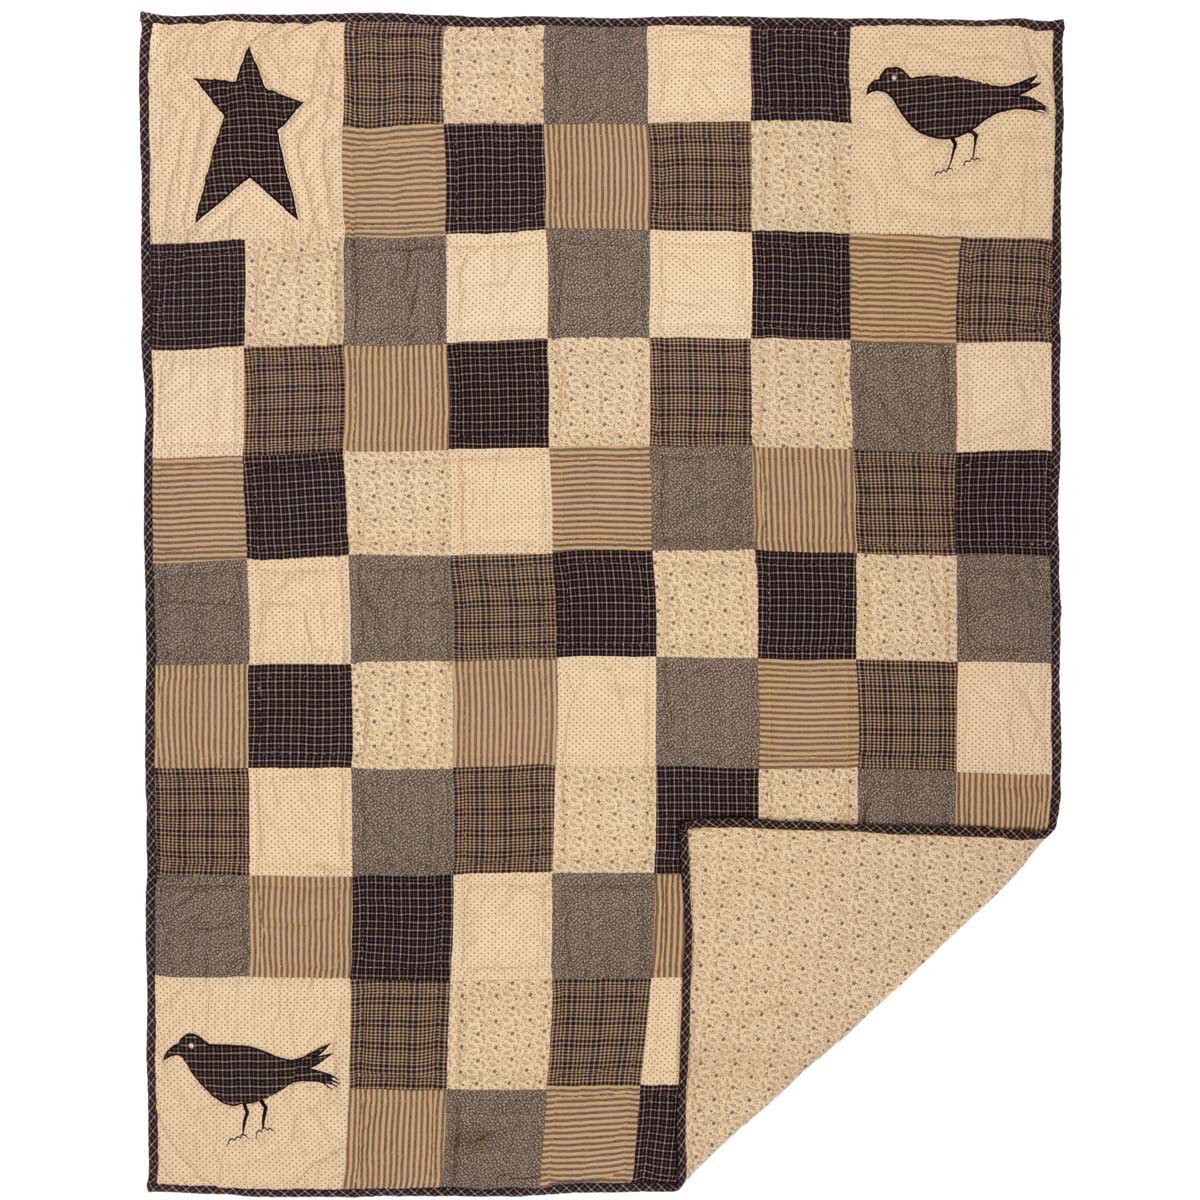 7197-Kettle-Grove-Applique-Crow-and-Star-Quilted-Throw-60x50-image-4